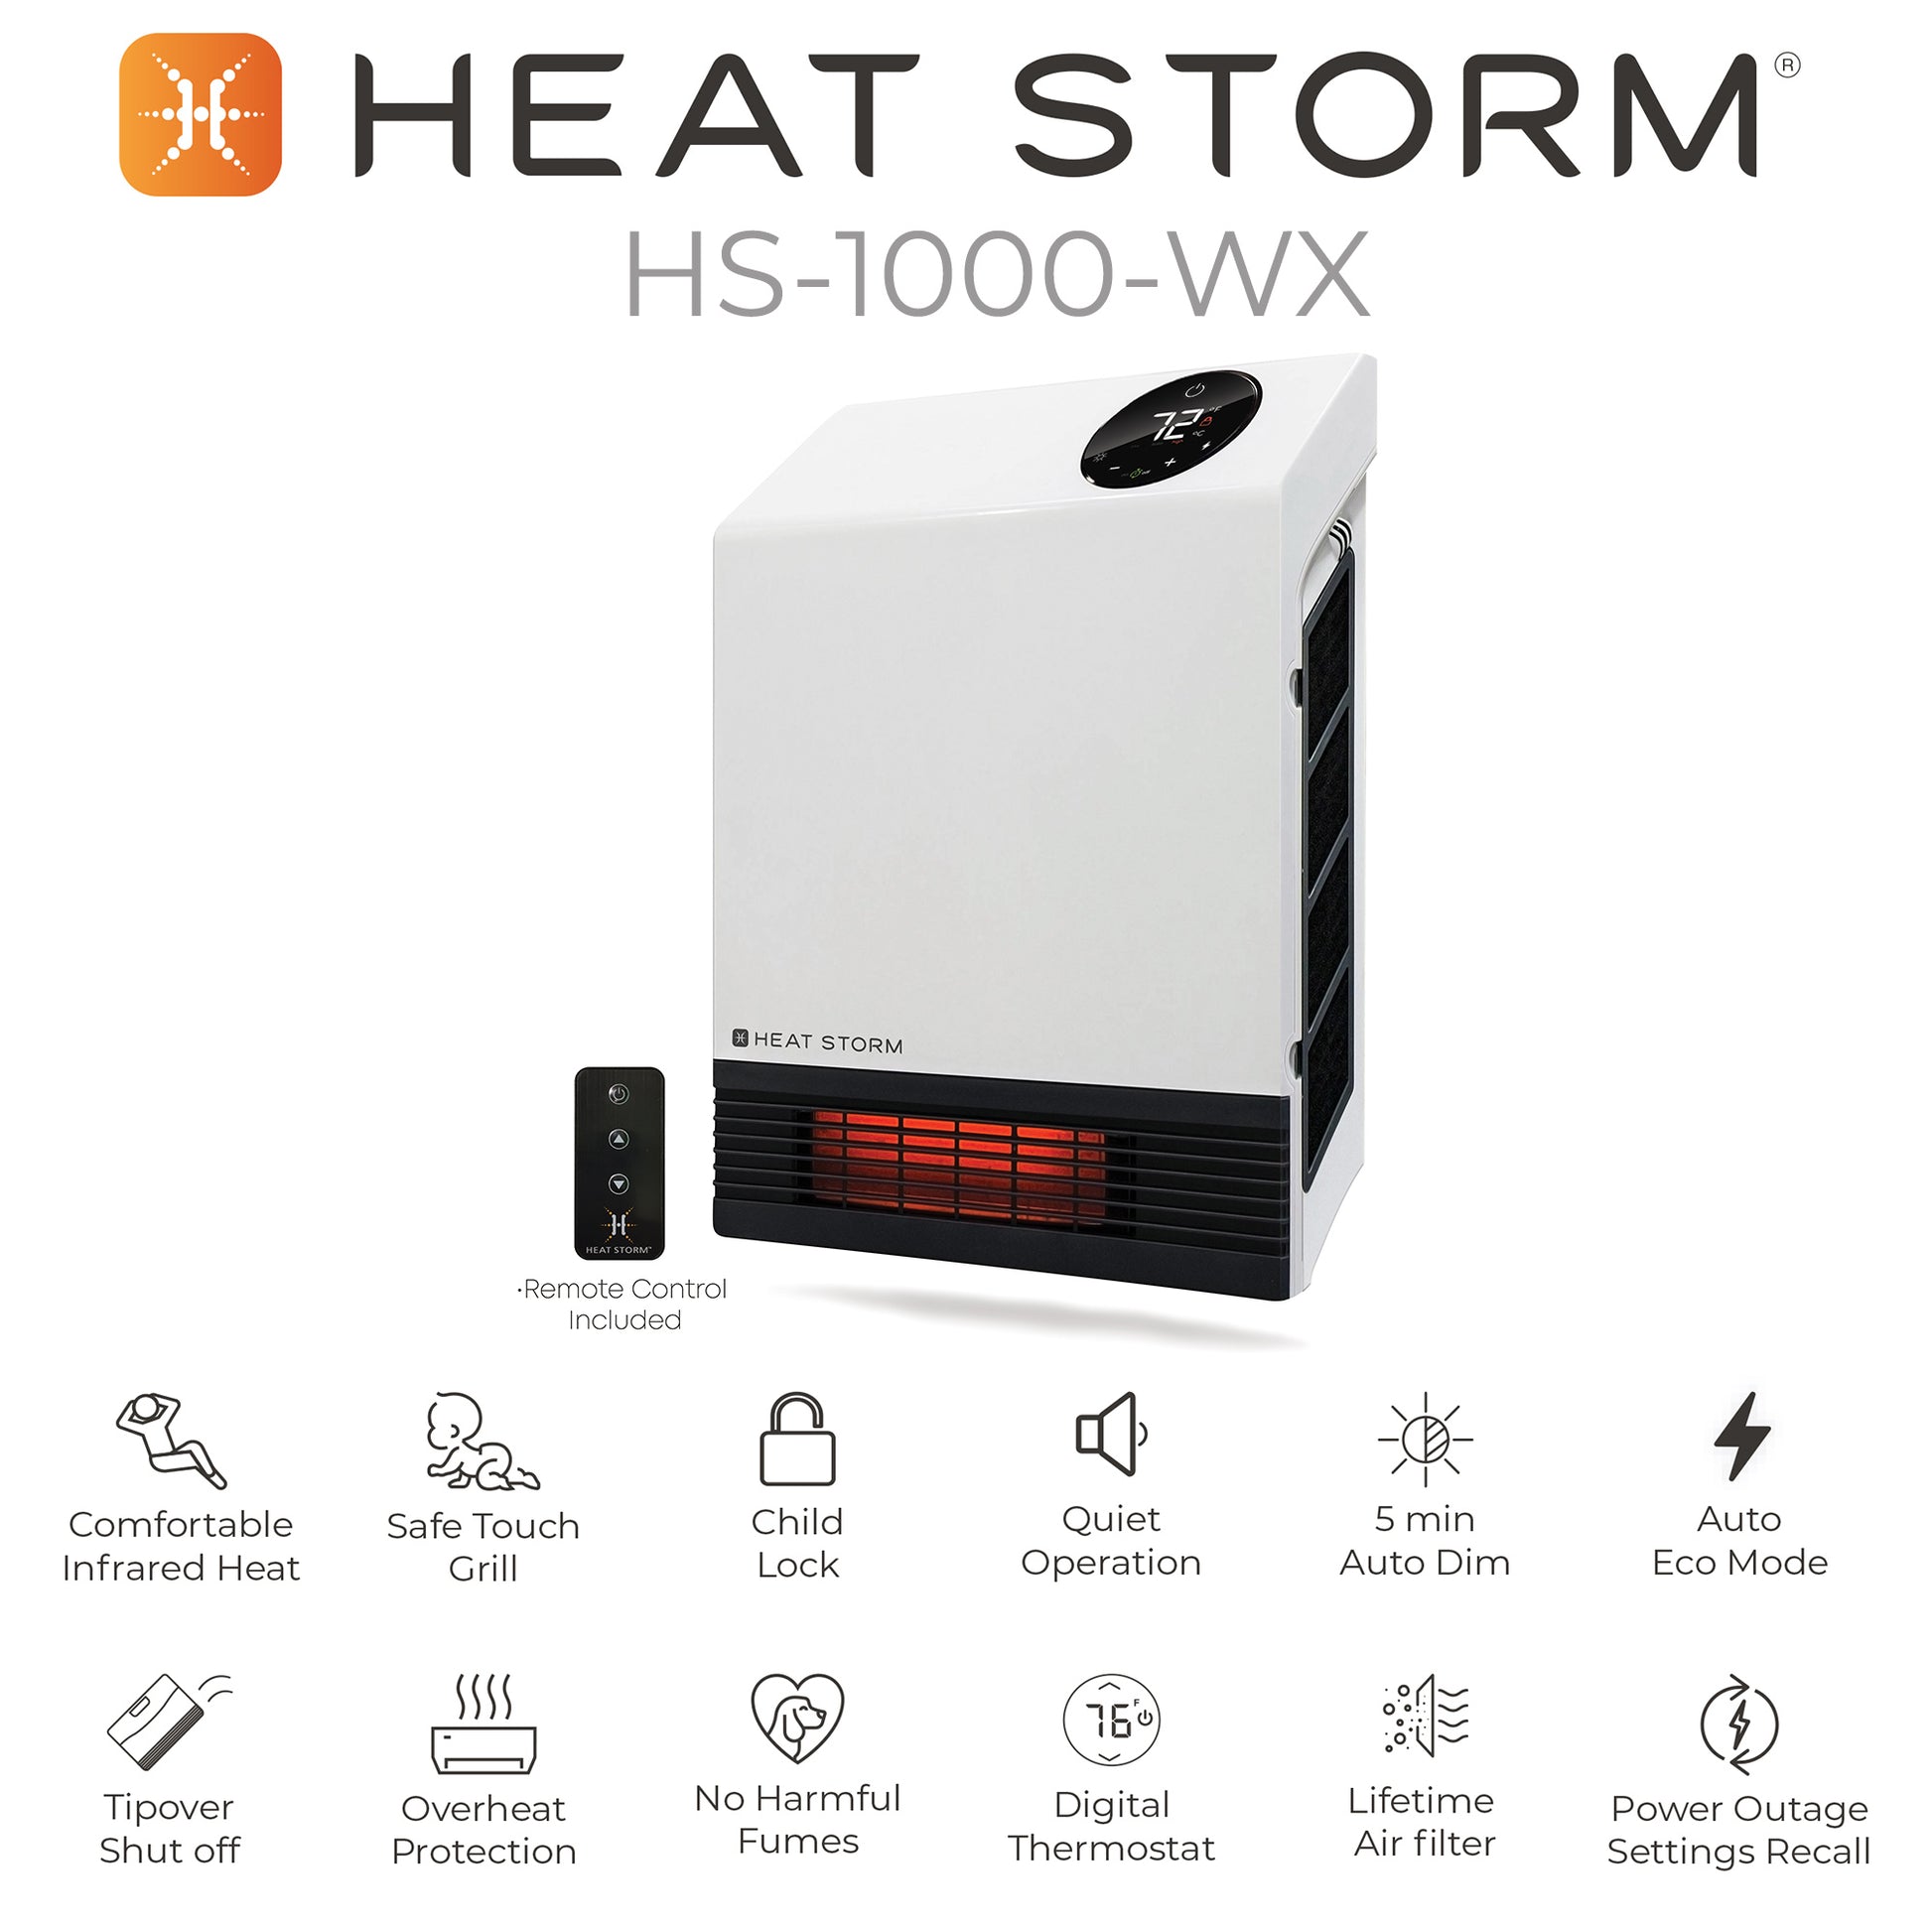 Infographic for heat storm infrared 1000 watt heater. Comfortable infrared heat, safe touch grill, child lock, quiet operation, 5 min auto dim, auto eco mode, tipover shut off, overheat protection, no harmful fumes, digital thermostat, lifetime air filter, power outage, settings recall